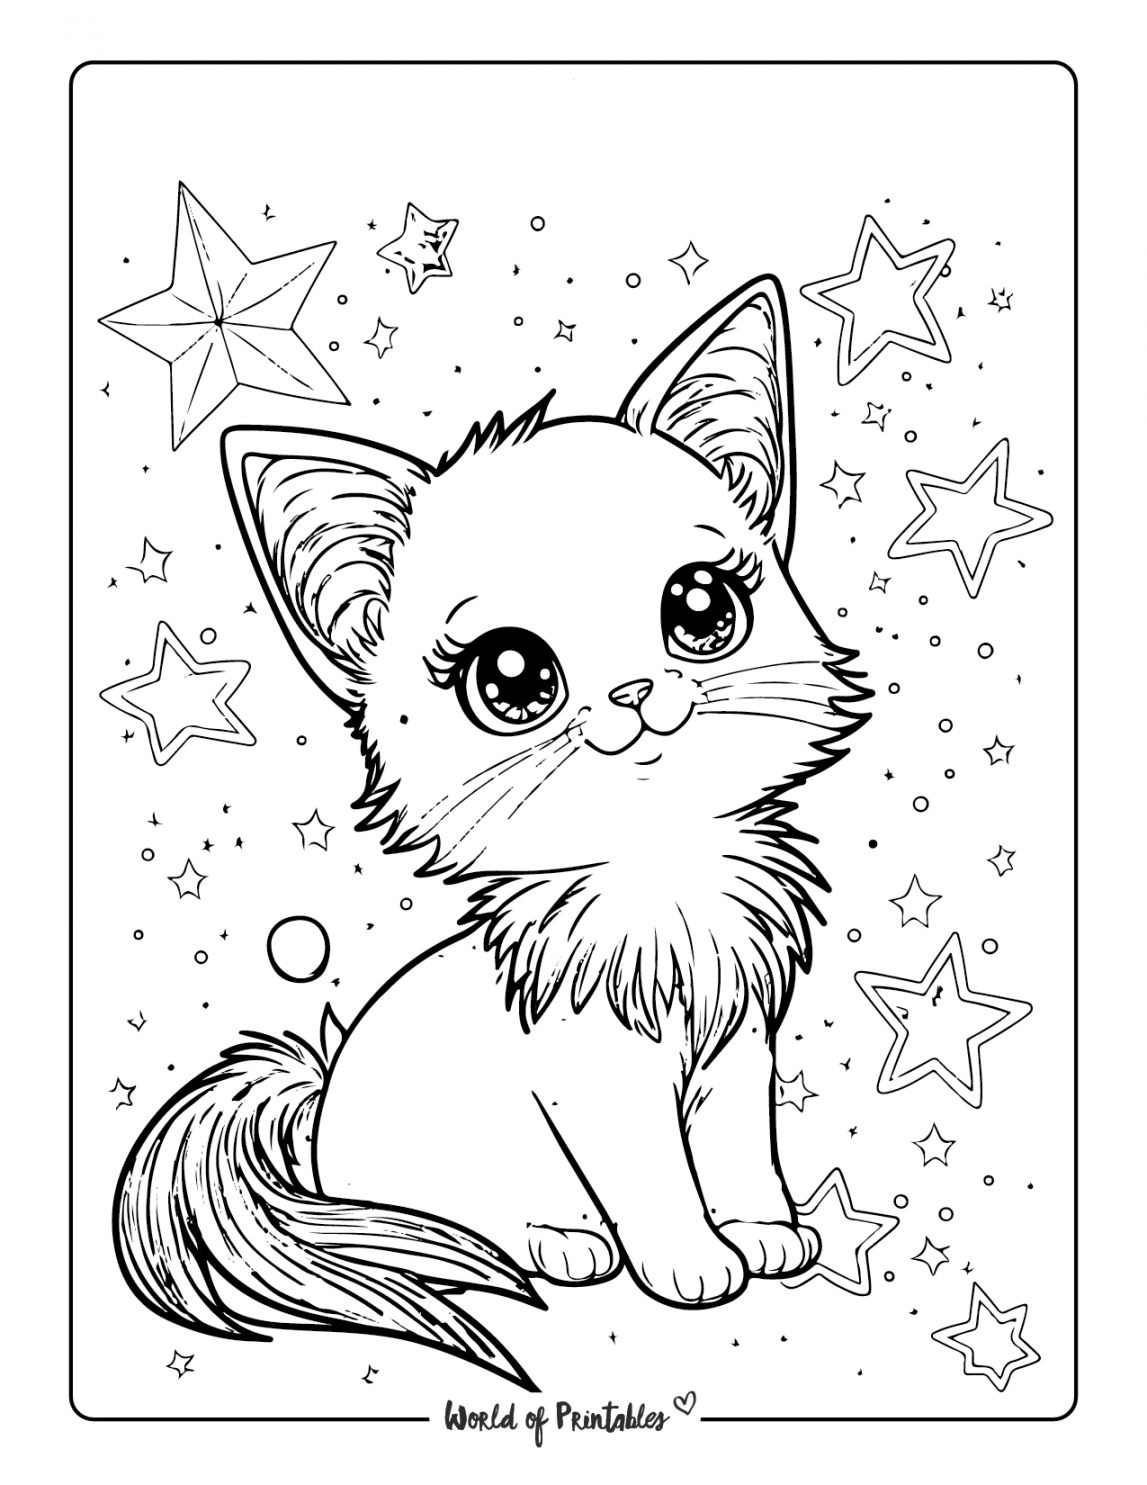 Free Printable Cat Coloring Pages - Printable - Cat Coloring Pages - World of Printables